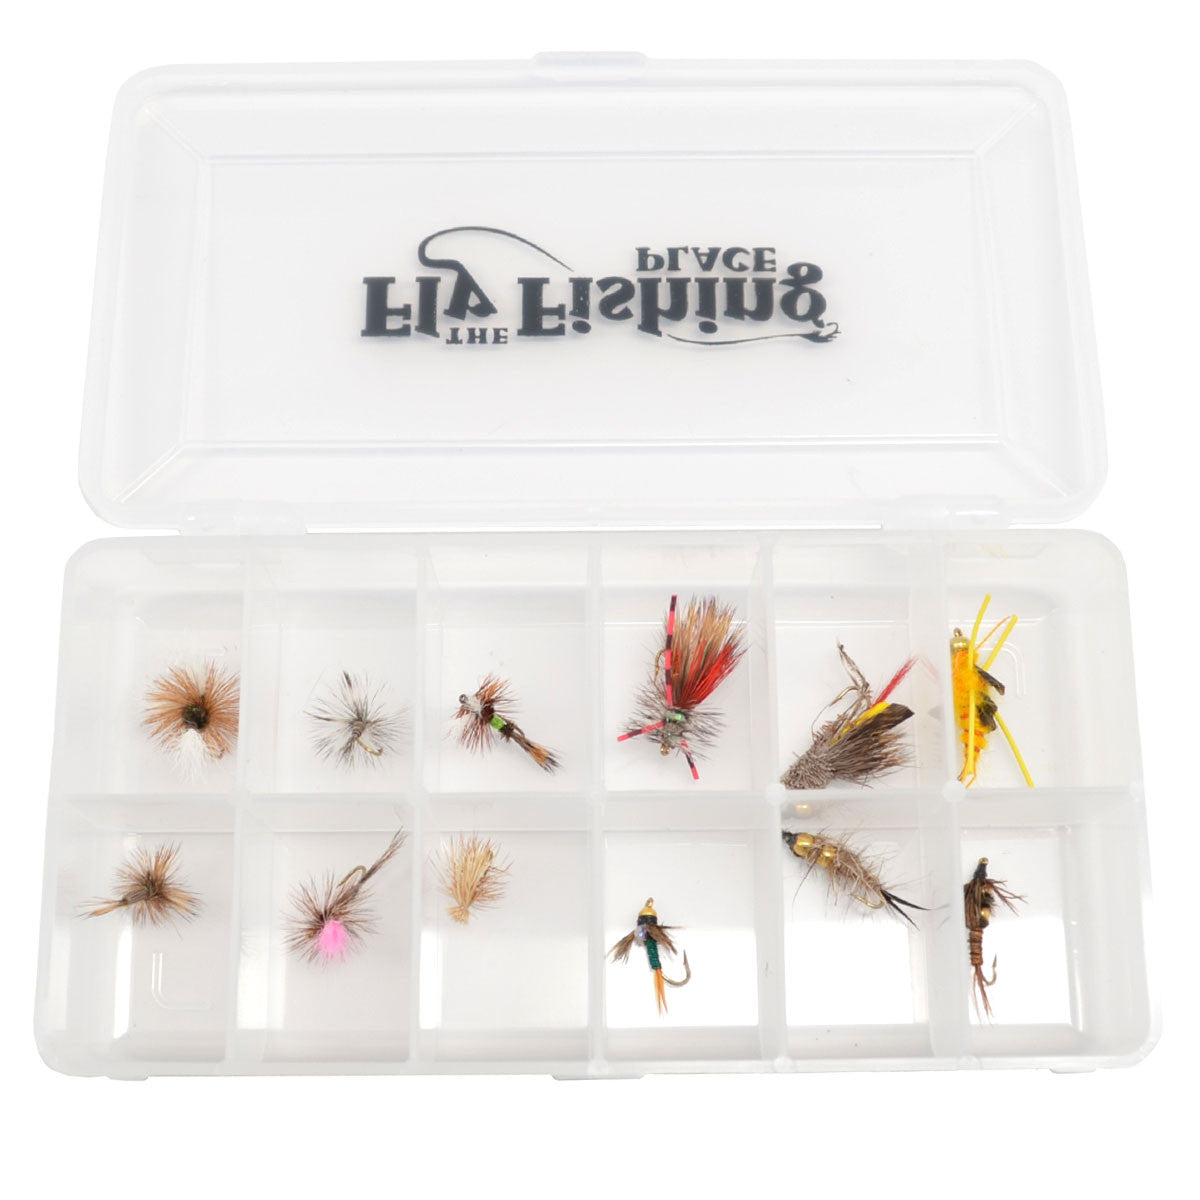 Trout Fly Assortment - Essential Western Dry and Nymph Fly Fishing Flies Collection - 1 Dozen Trout Flies with Fly Box